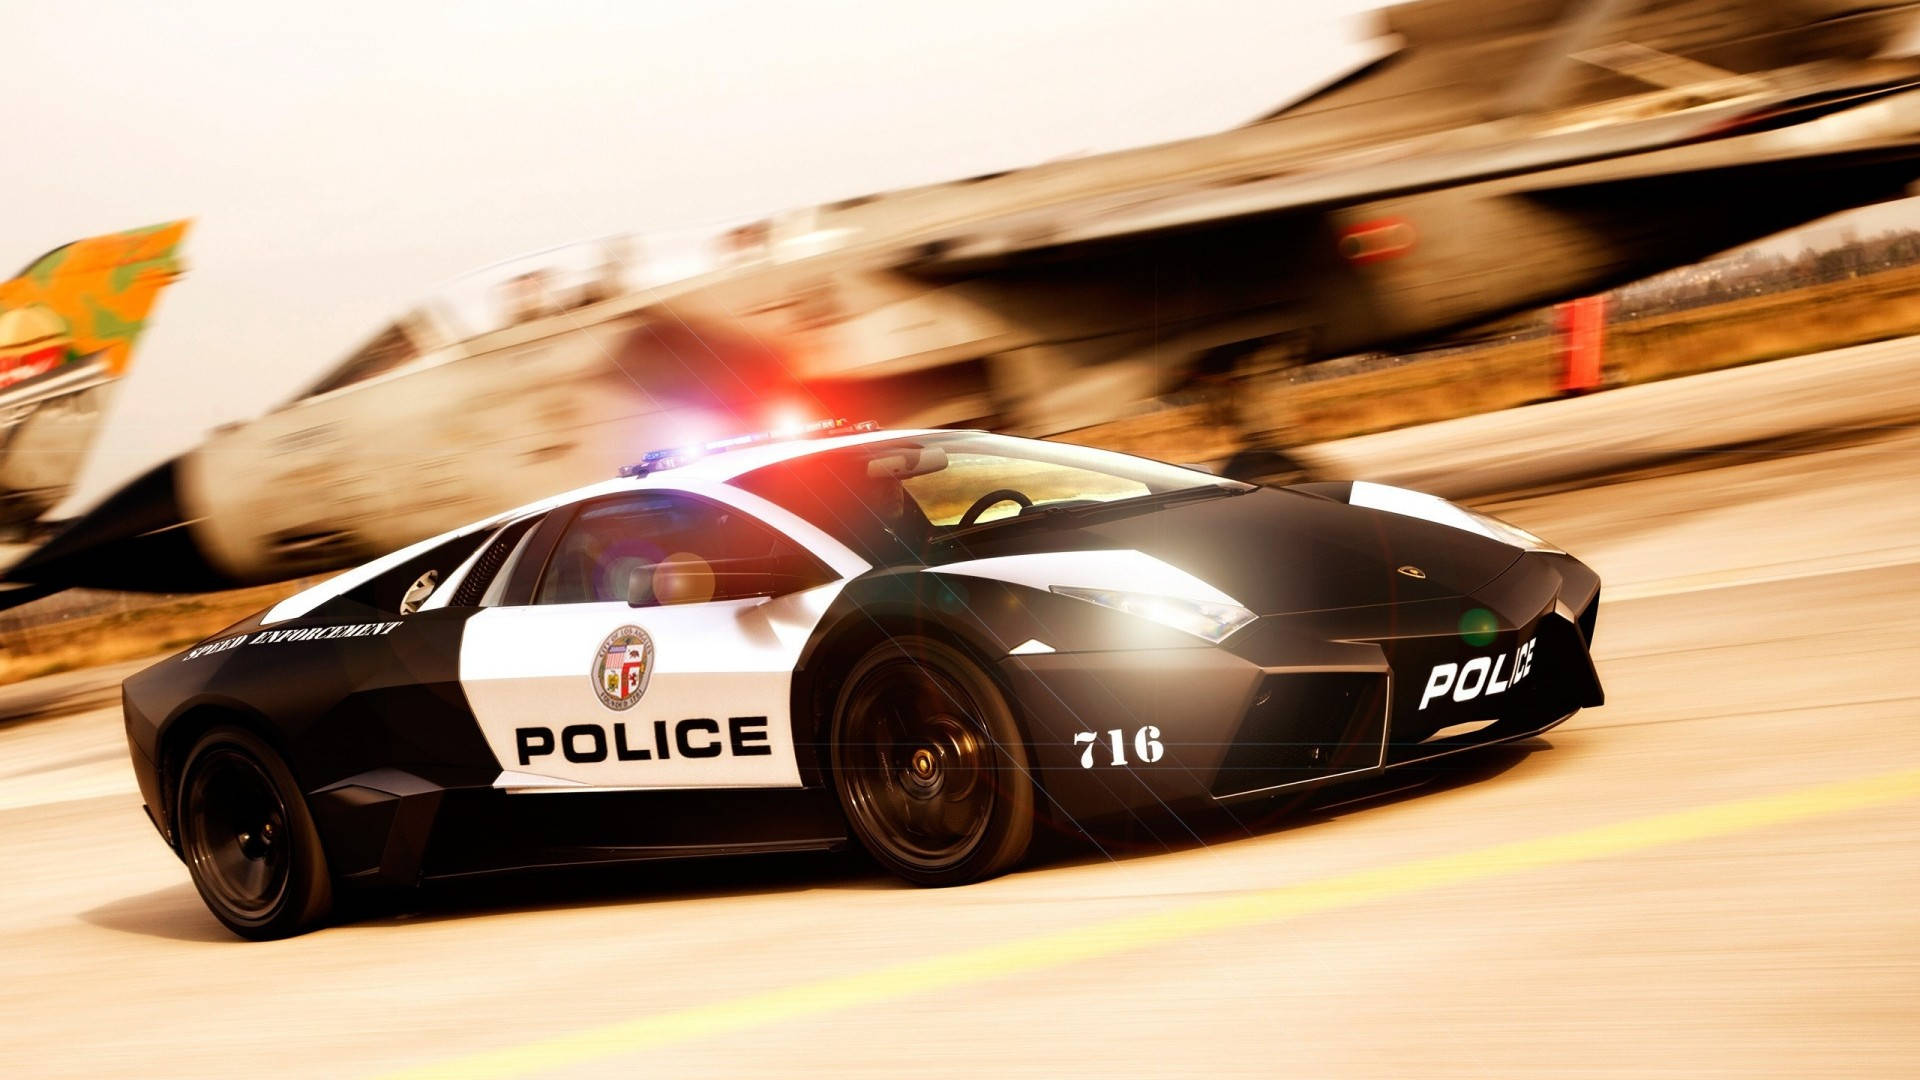 Need For Speed Koenigsegg Agera Police Car Background